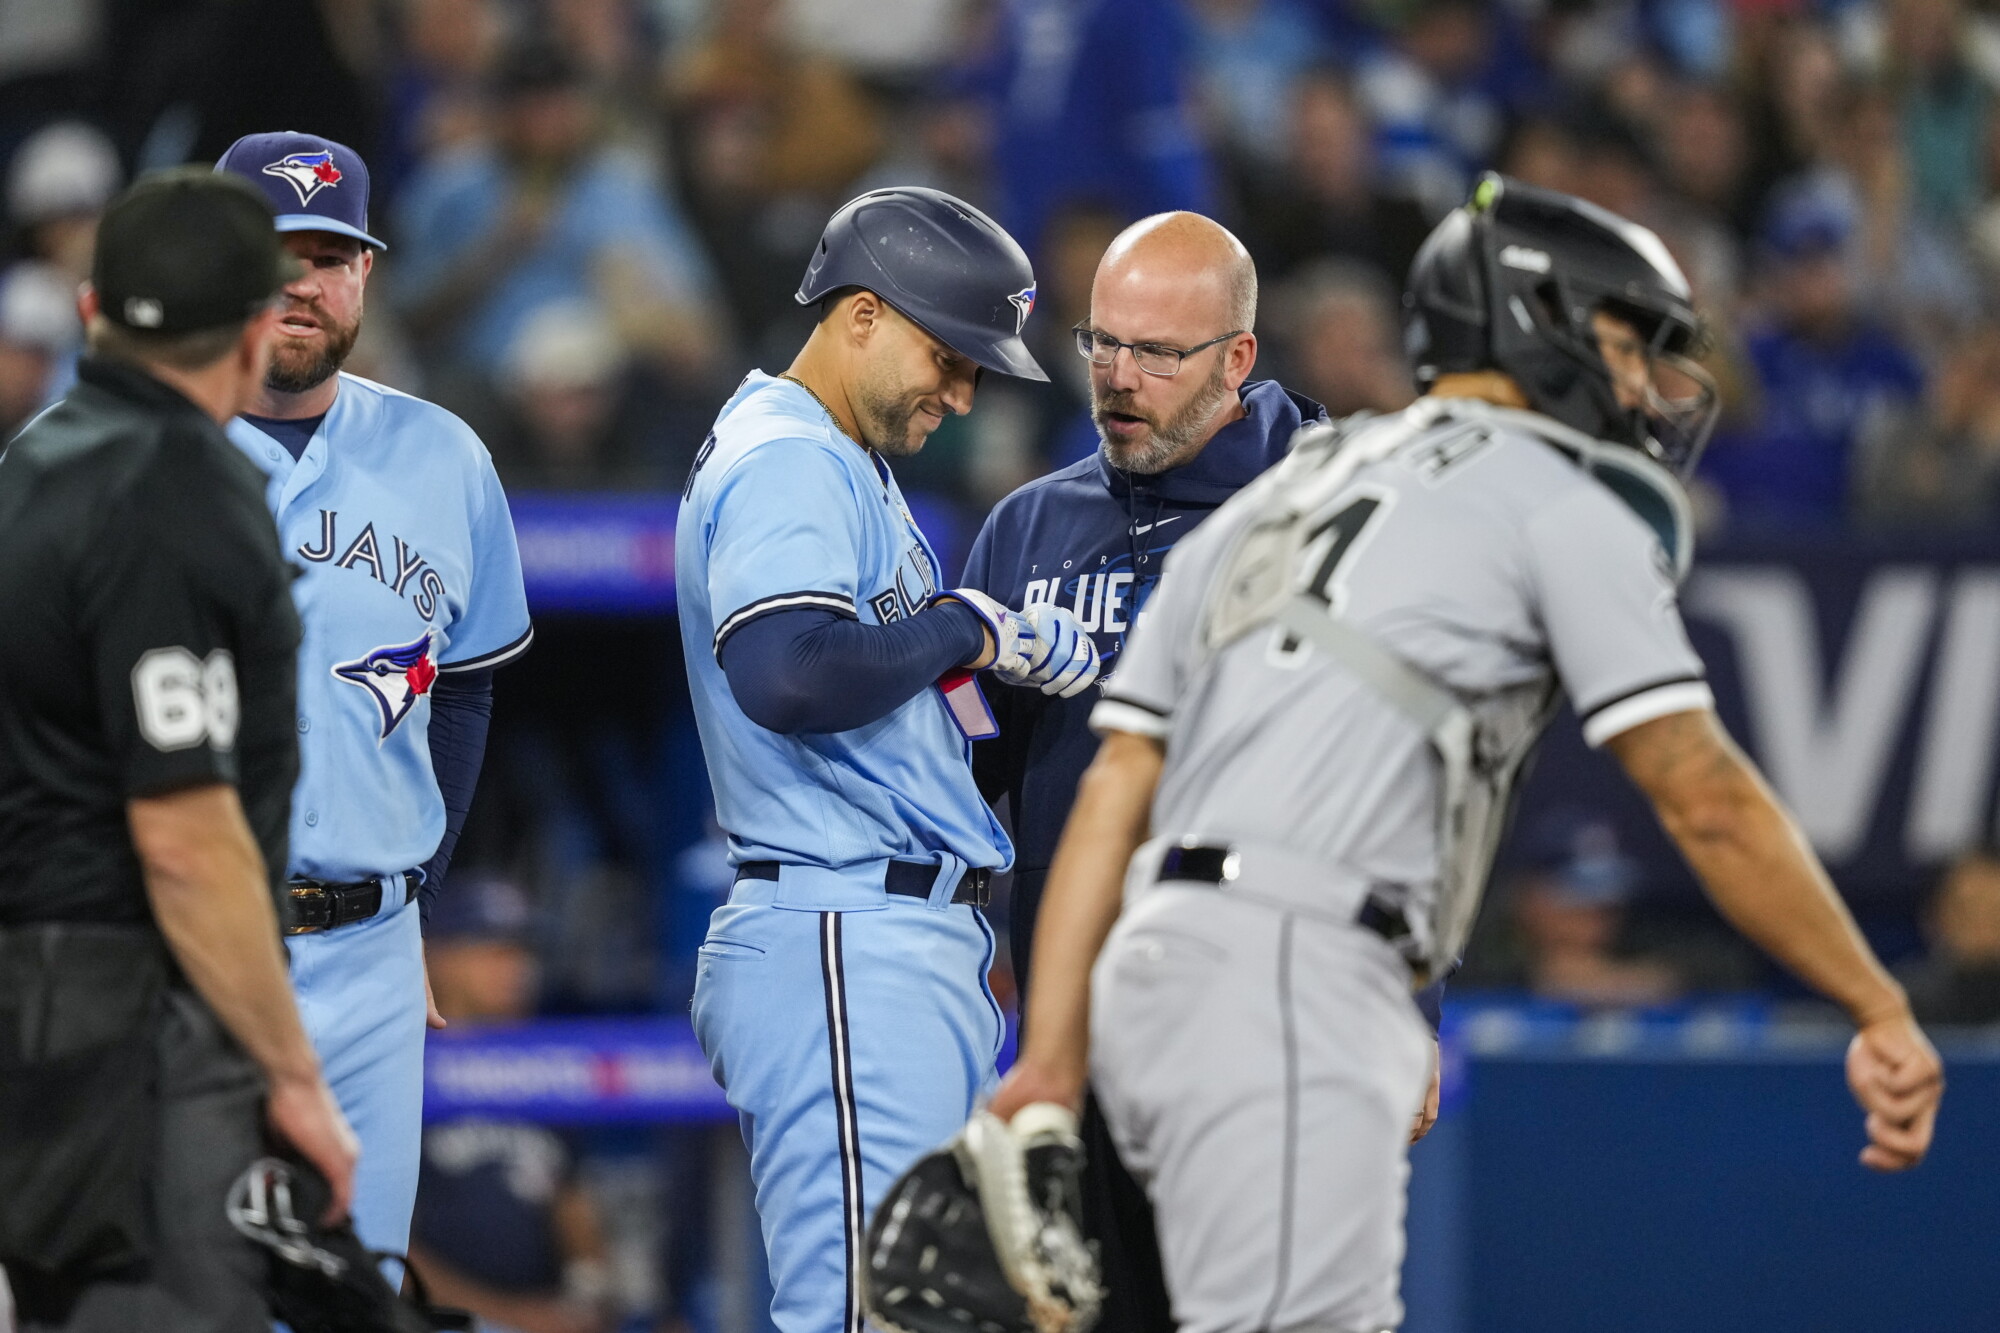 Bichette homers and Blue Jays top Royals 8-0